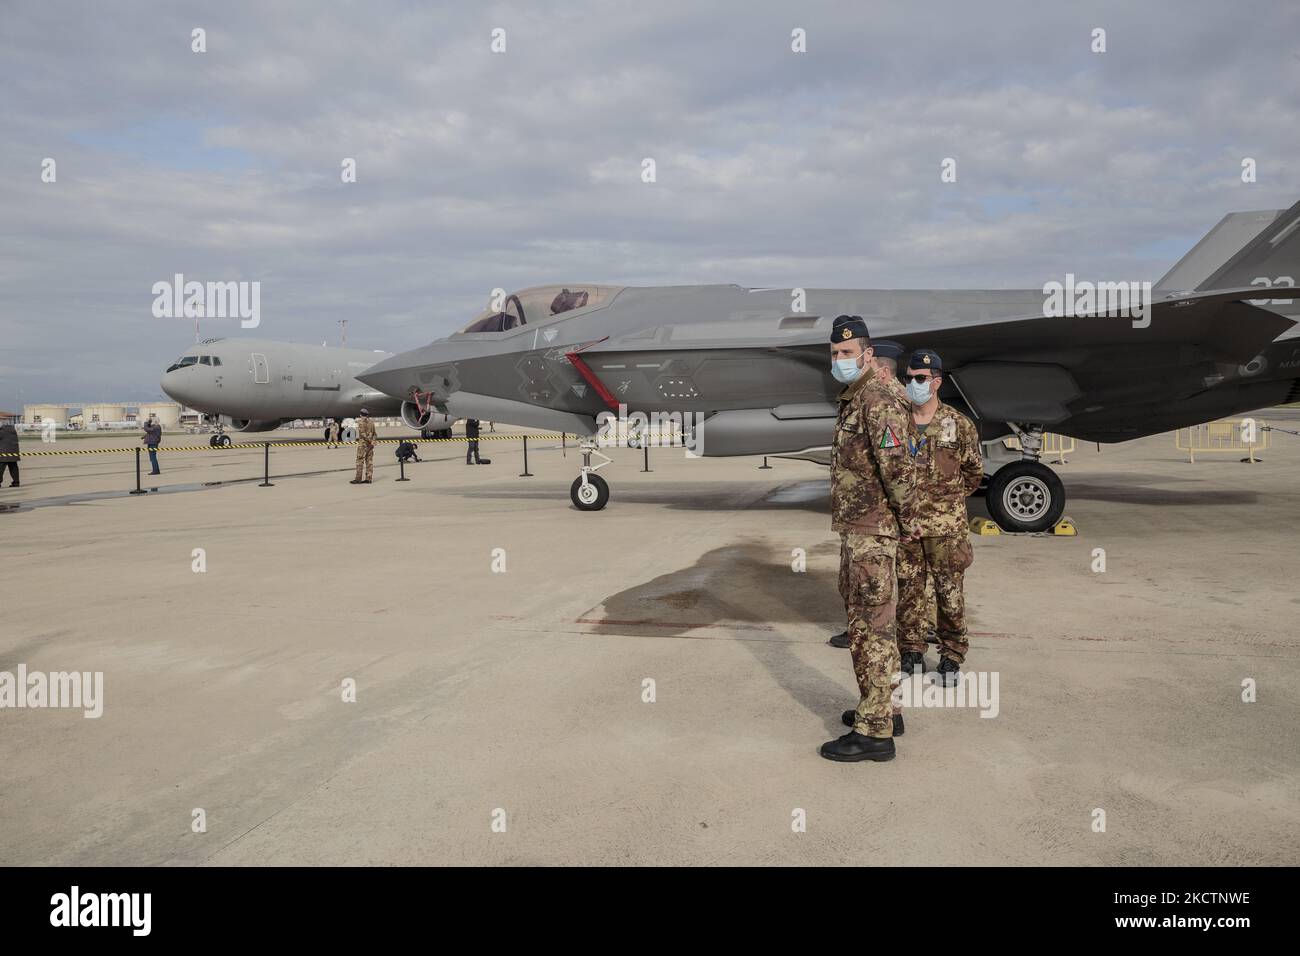 F-35 combat aircraft displayed during the commemoration of the Kindu massacre at the military airport in Pisa, Italy, on November 11, 2021. The Kindu massacre, took place on 11 or 12 November 1961 in Kindu Port-Émpain, in the Congo-Léopoldville, former Belgian Congo, where thirteen Italian airmen, members of the United Nations Operation in the Congo, were murdered. The massacre was commemorated today by the 46th Air Brigade of Pisa inside the military airport at the Kindu Shrine. The mass was celebrated by the Military Ordinary, Archbishop Santo Marcianò, at the presence of the Chief of Staff  Stock Photo